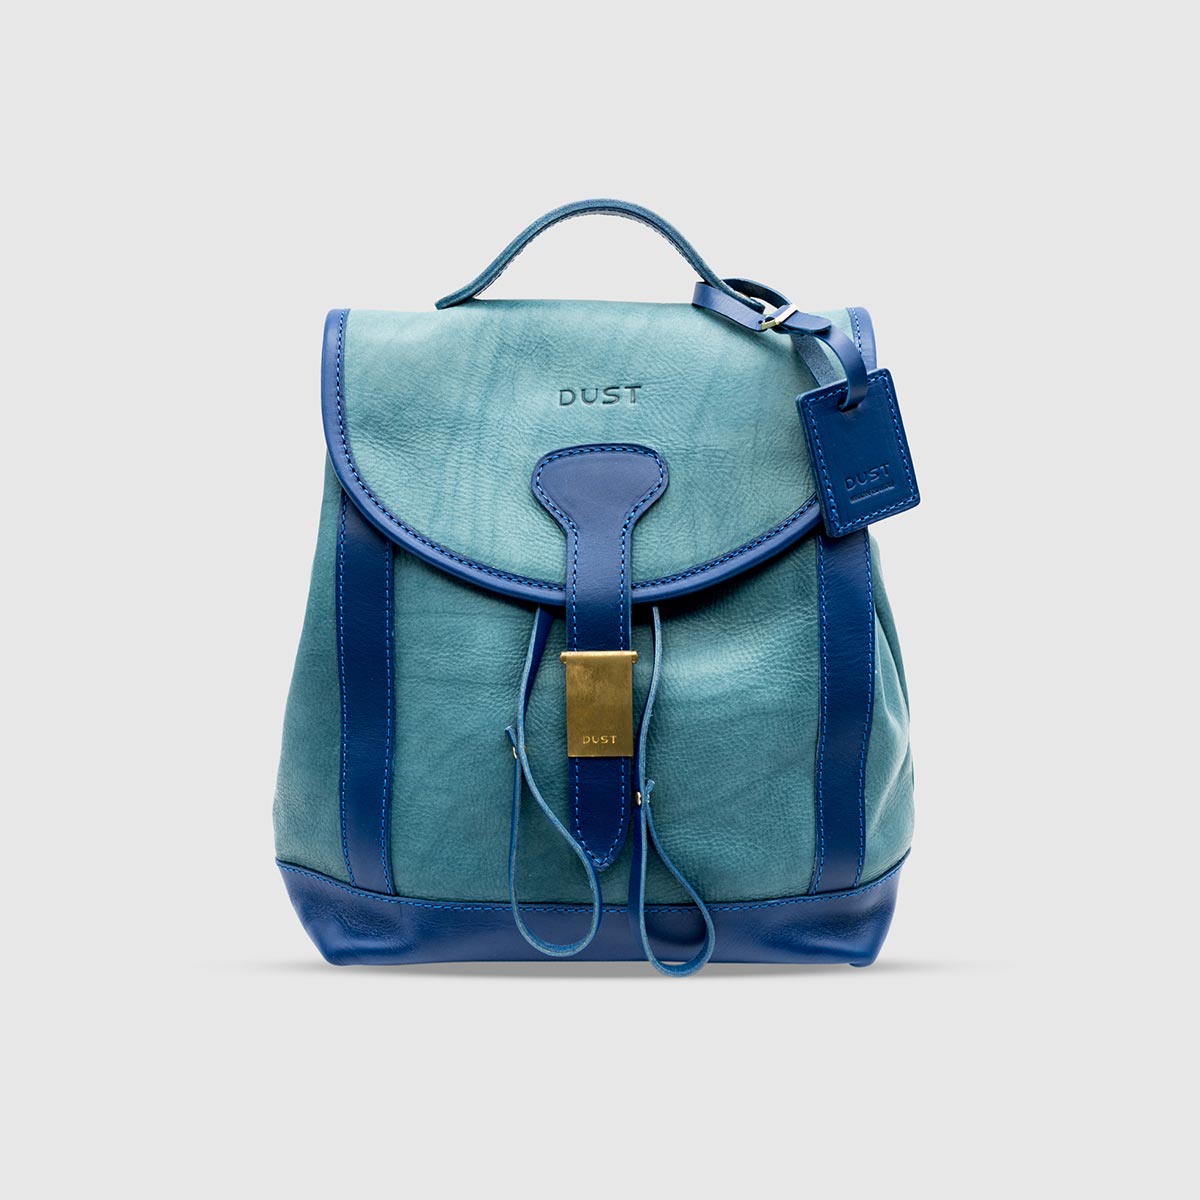 Vegetable Tumbled Leather Backpack – Light Blue Leather